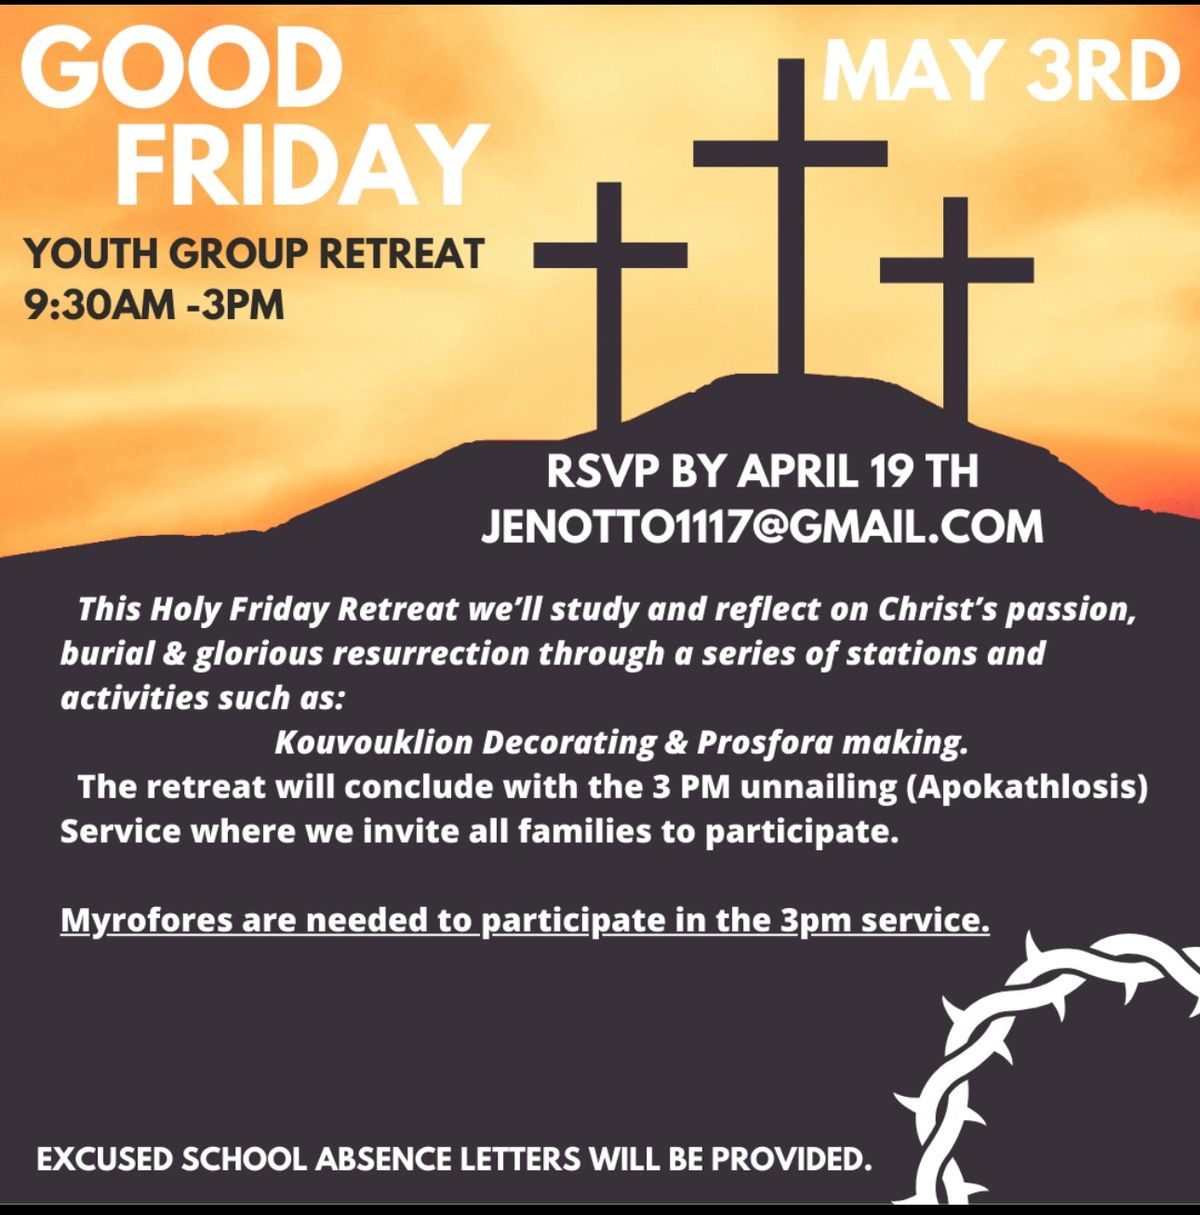 Good Friday Youth Group Retreat